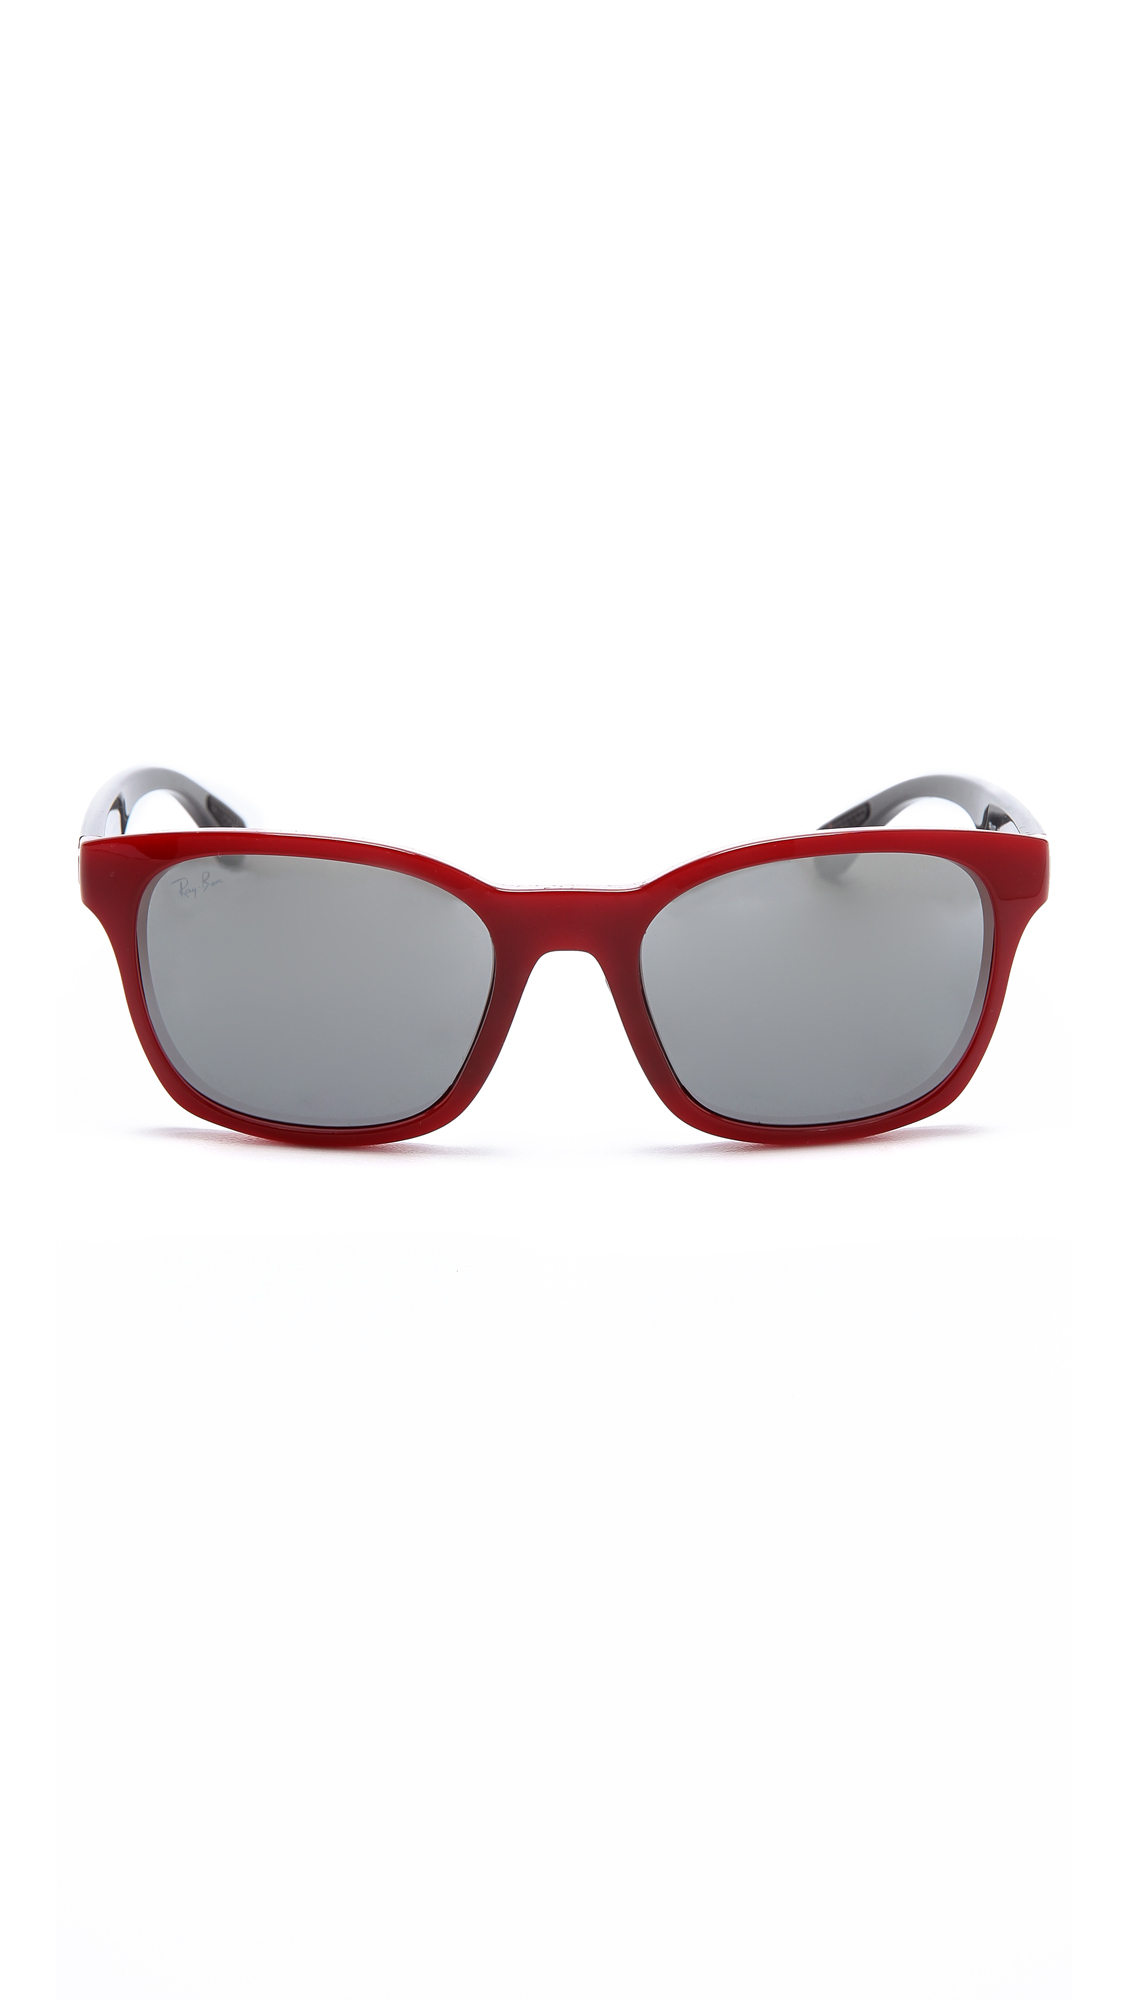 Ray-Ban Oversized Square Sunglasses in Red - Lyst